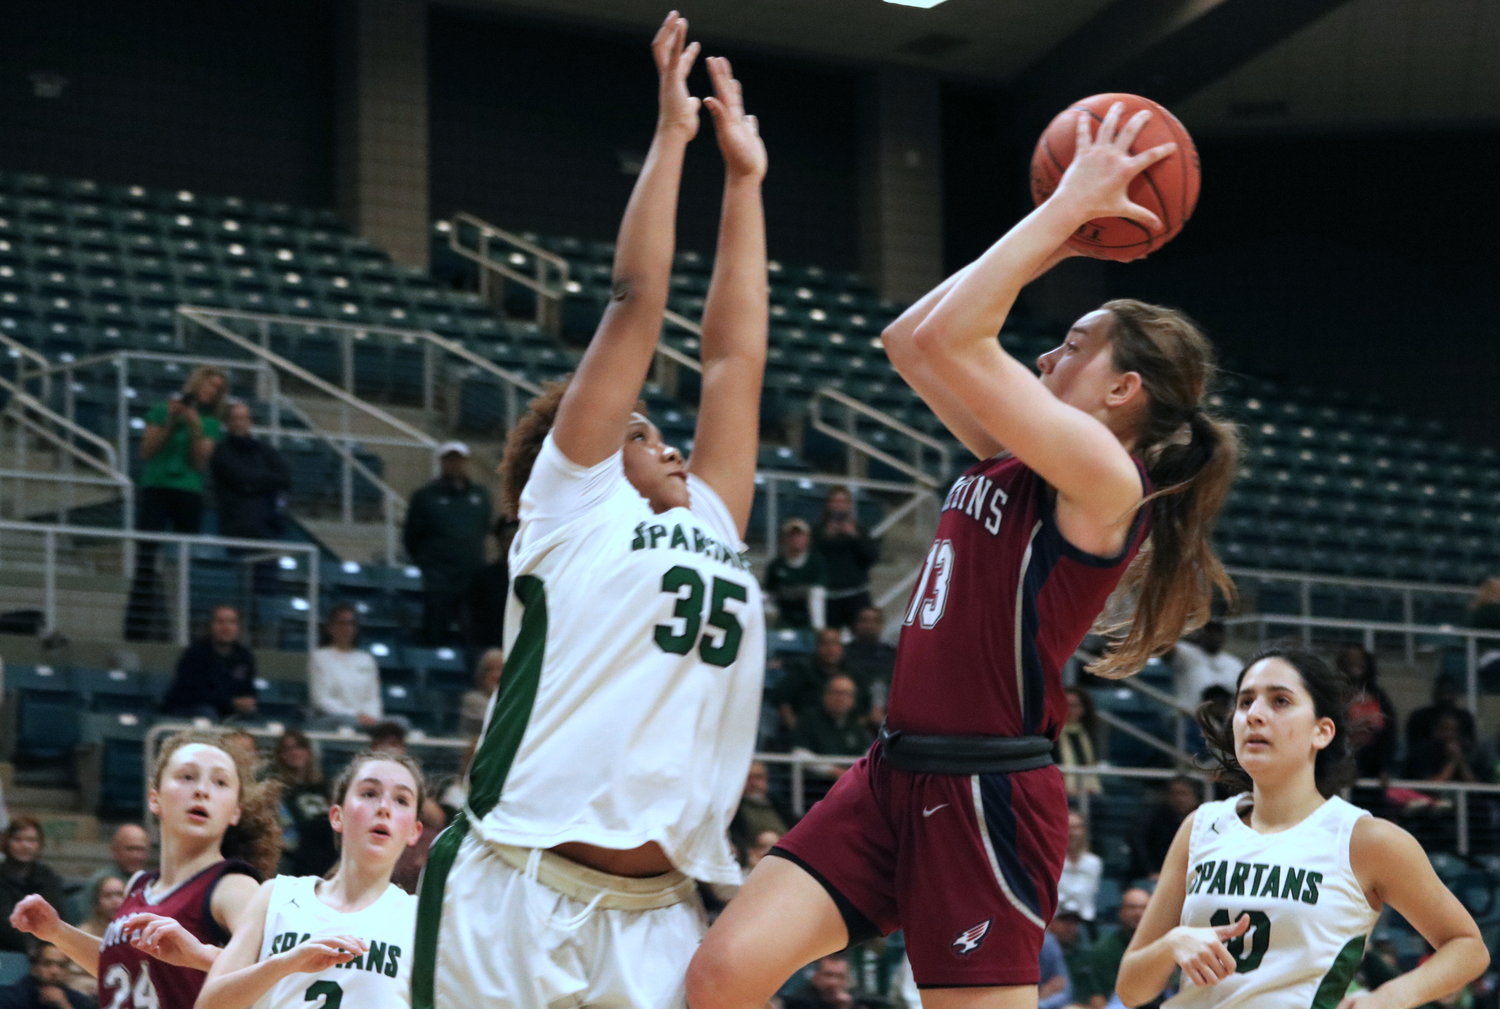 Macy Spencer shoots over a defender during Friday’s game between Tompkins and Stratford at the Merrell Center.